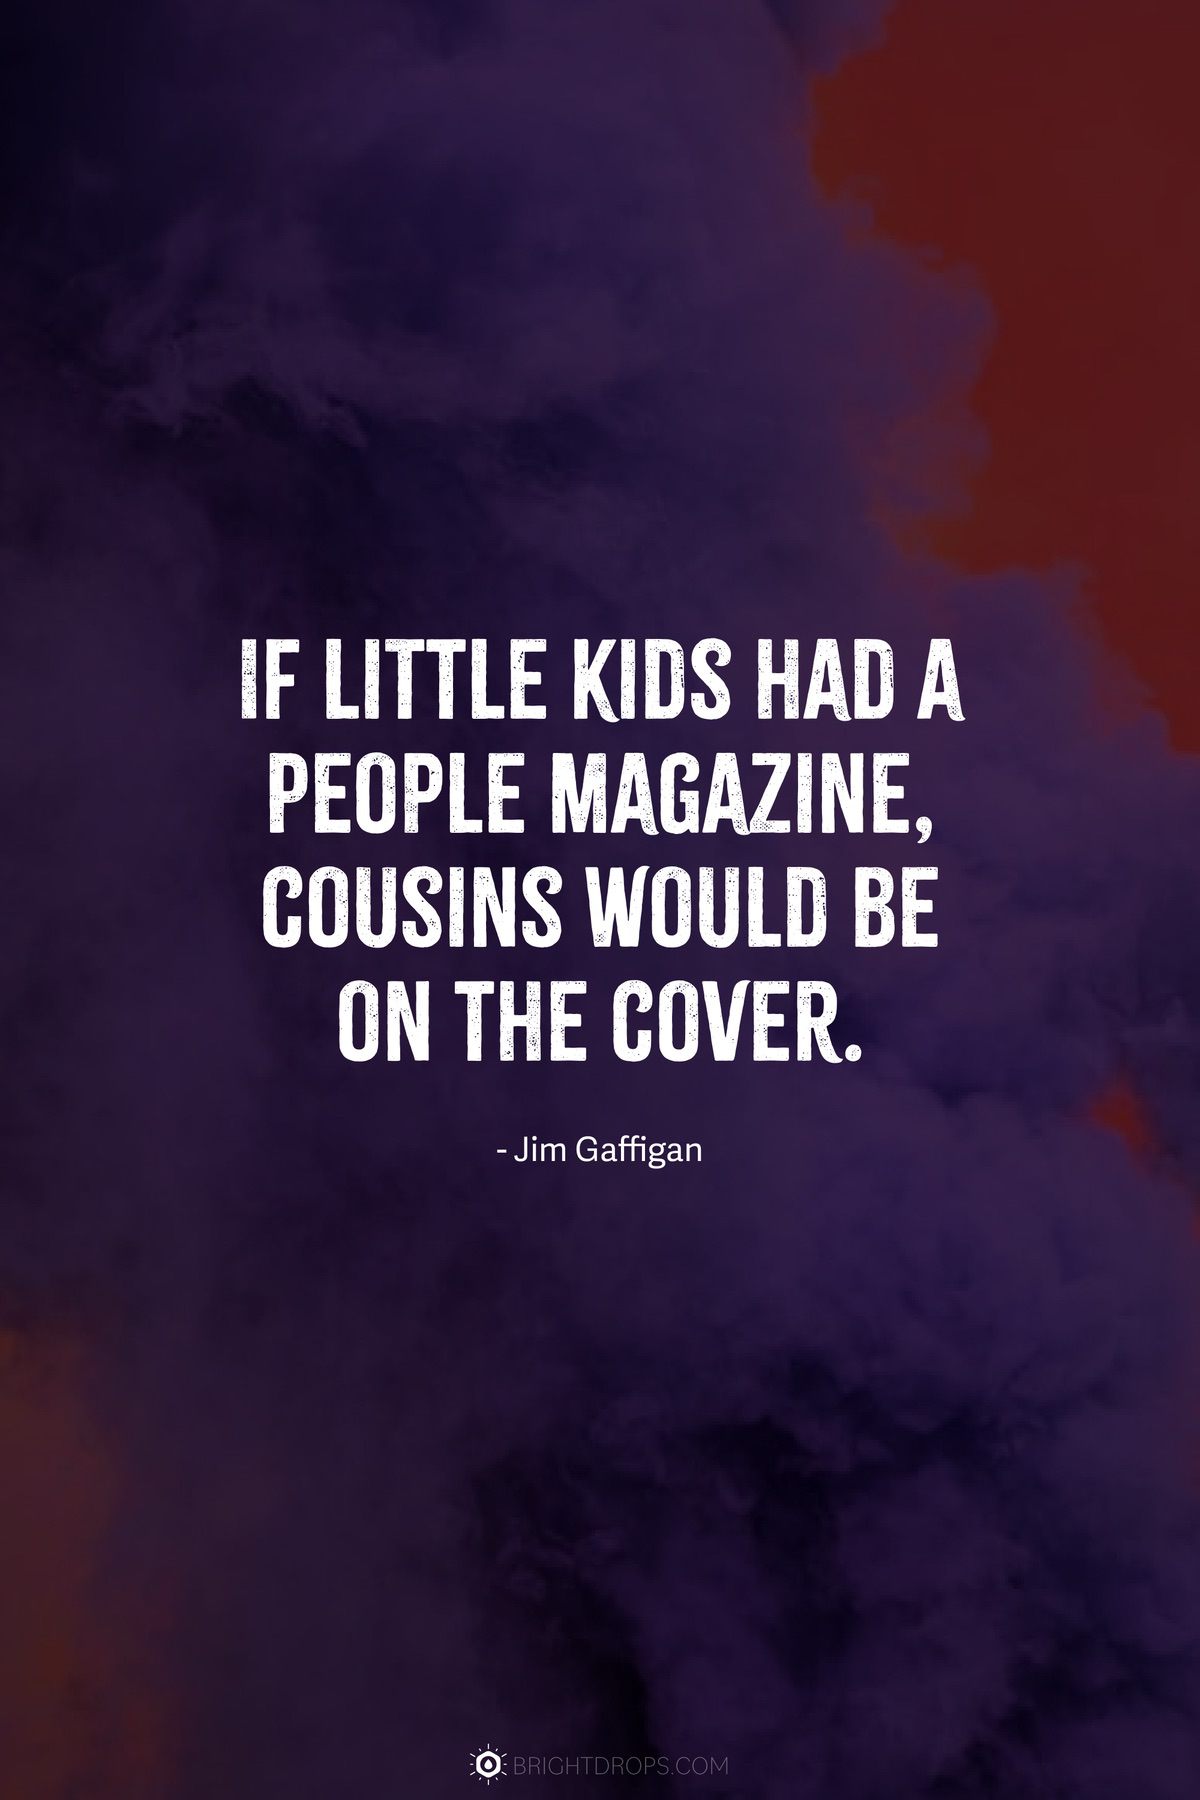 If little kids had a People magazine, cousins would be on the cover.